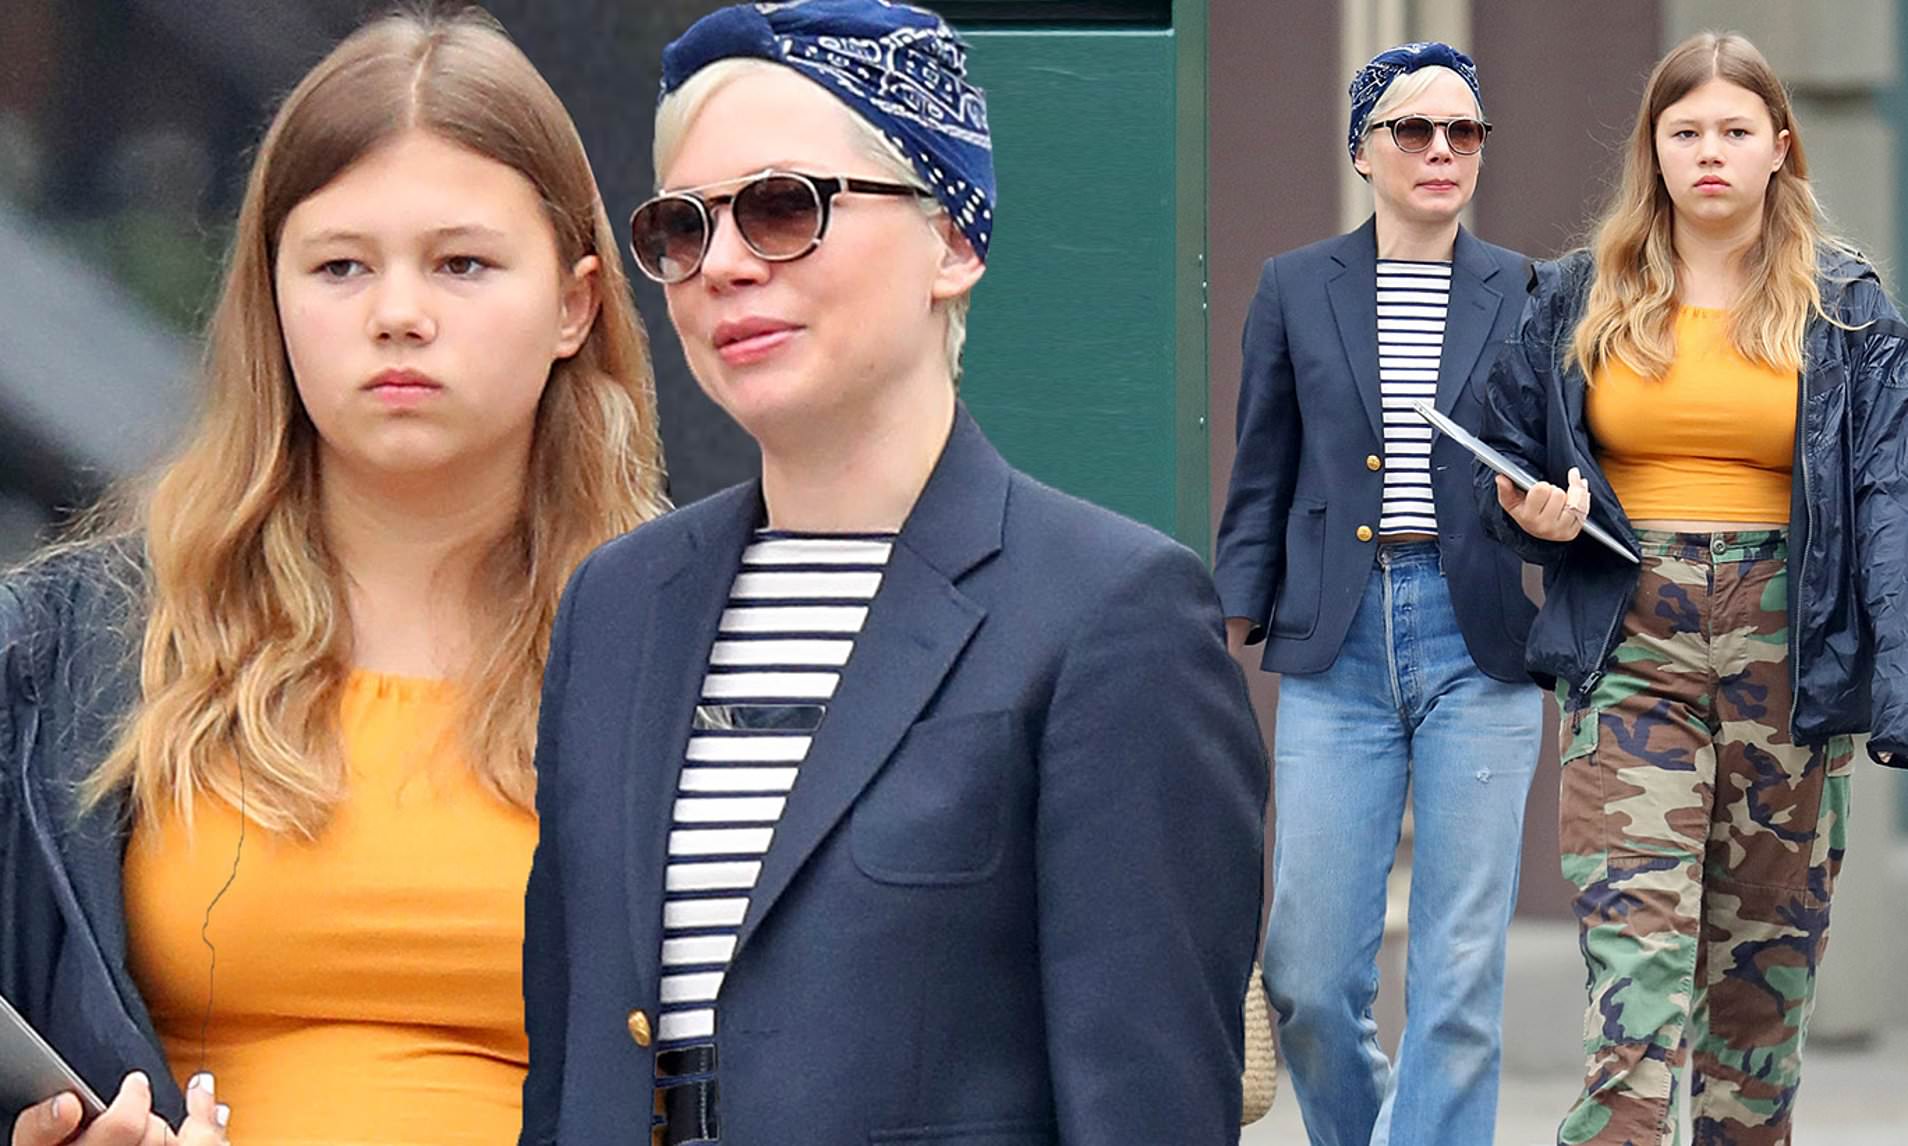 Heath Ledger’s Daughter Matilda Out & About With Mom Michelle Williams – Hollywood Life